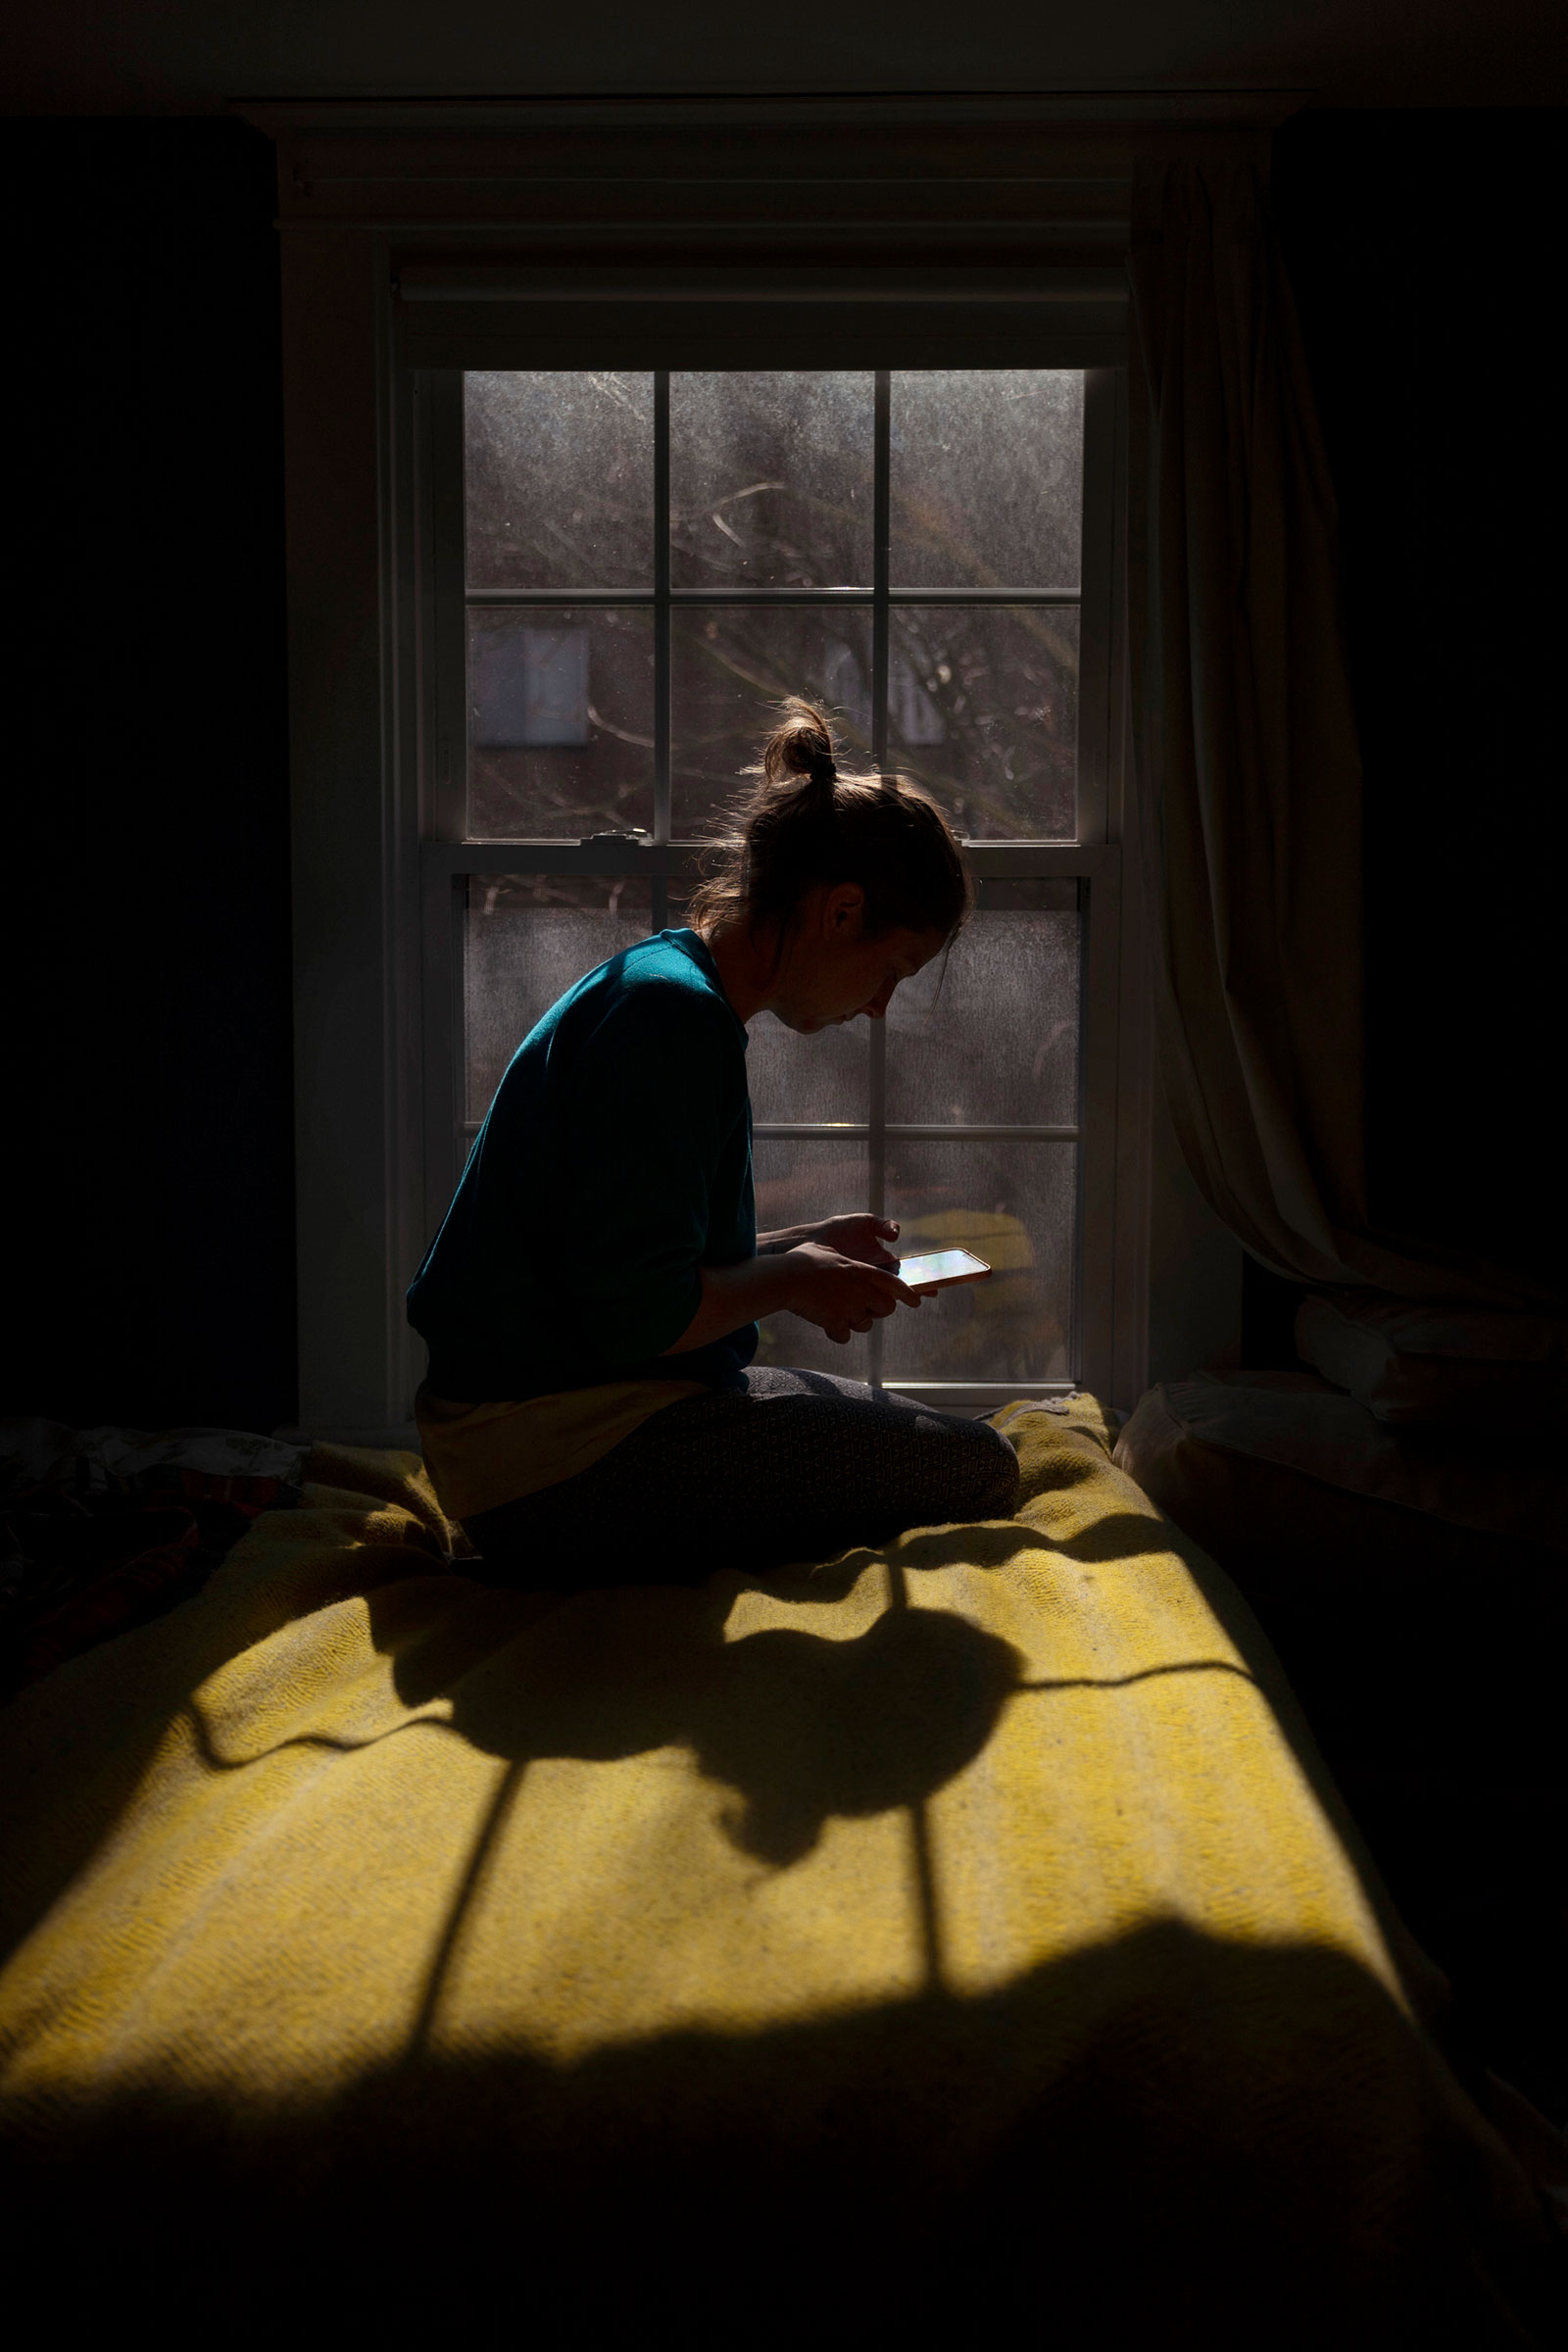 When the pandemic hit, photographer Eva O’Leary found herself living on her own in her central Pennsylvania hometown. She navigated her isolation through a series of self-portraits. (Eva O'Leary)